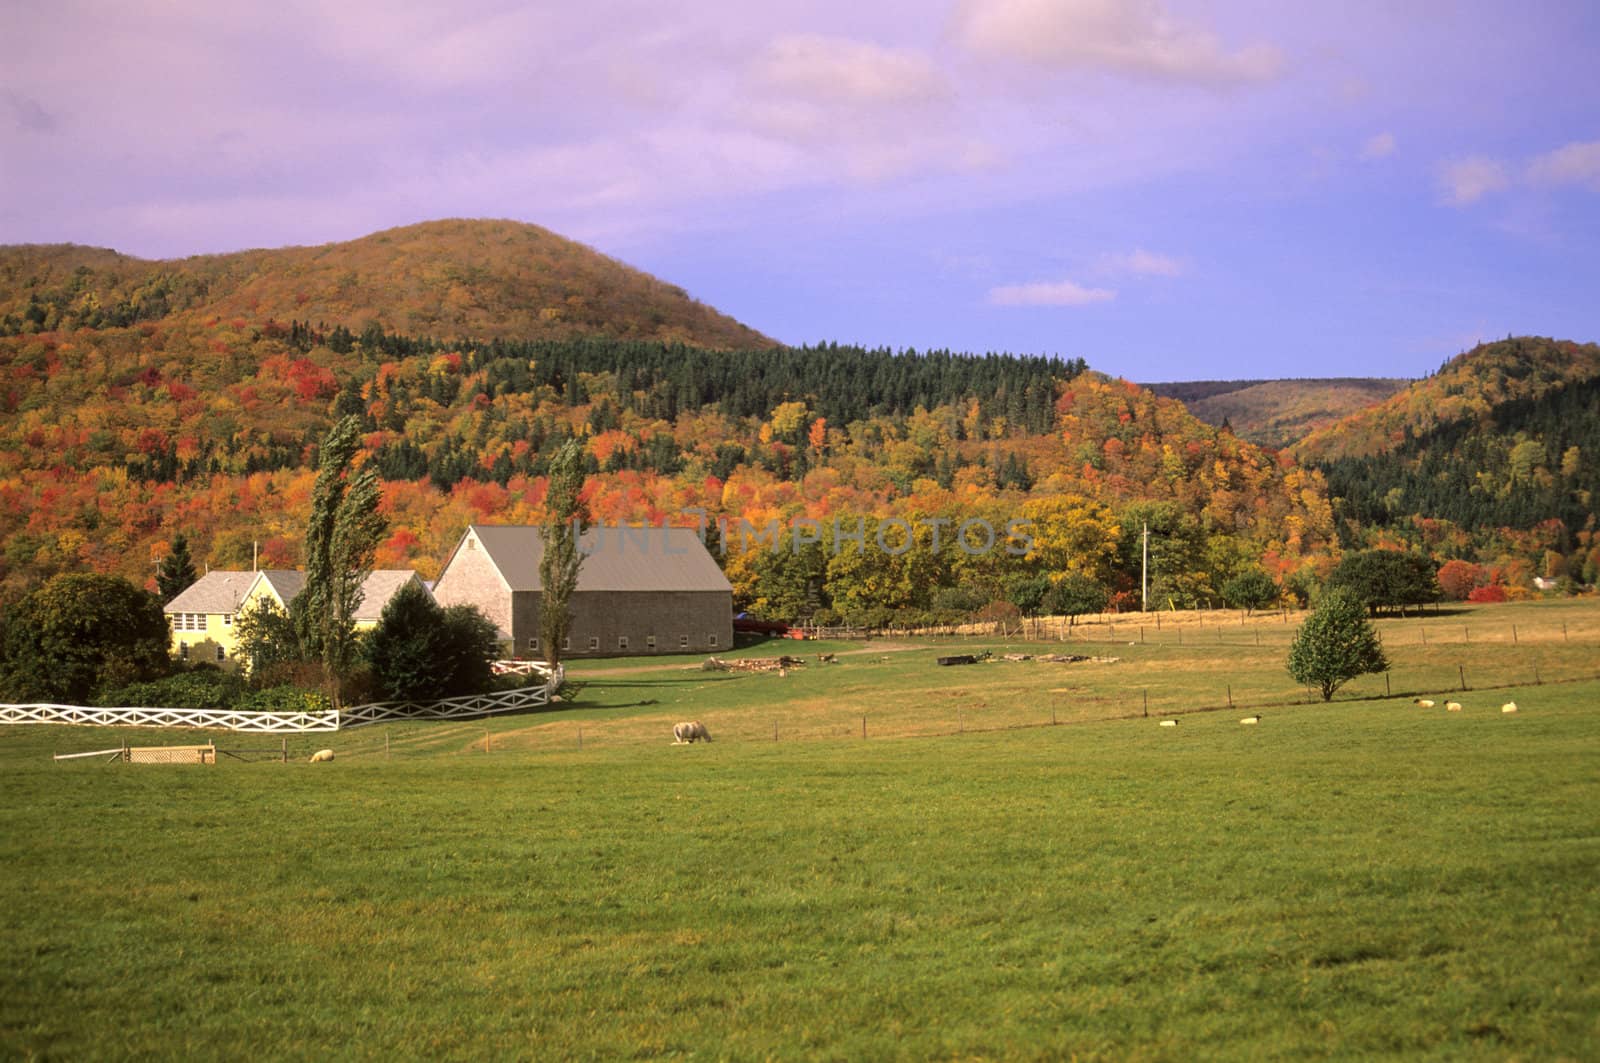 A rural sheep farm sits surrounded by mountains with colorful autumn leaves in Cape Breton, Nova Scotia.